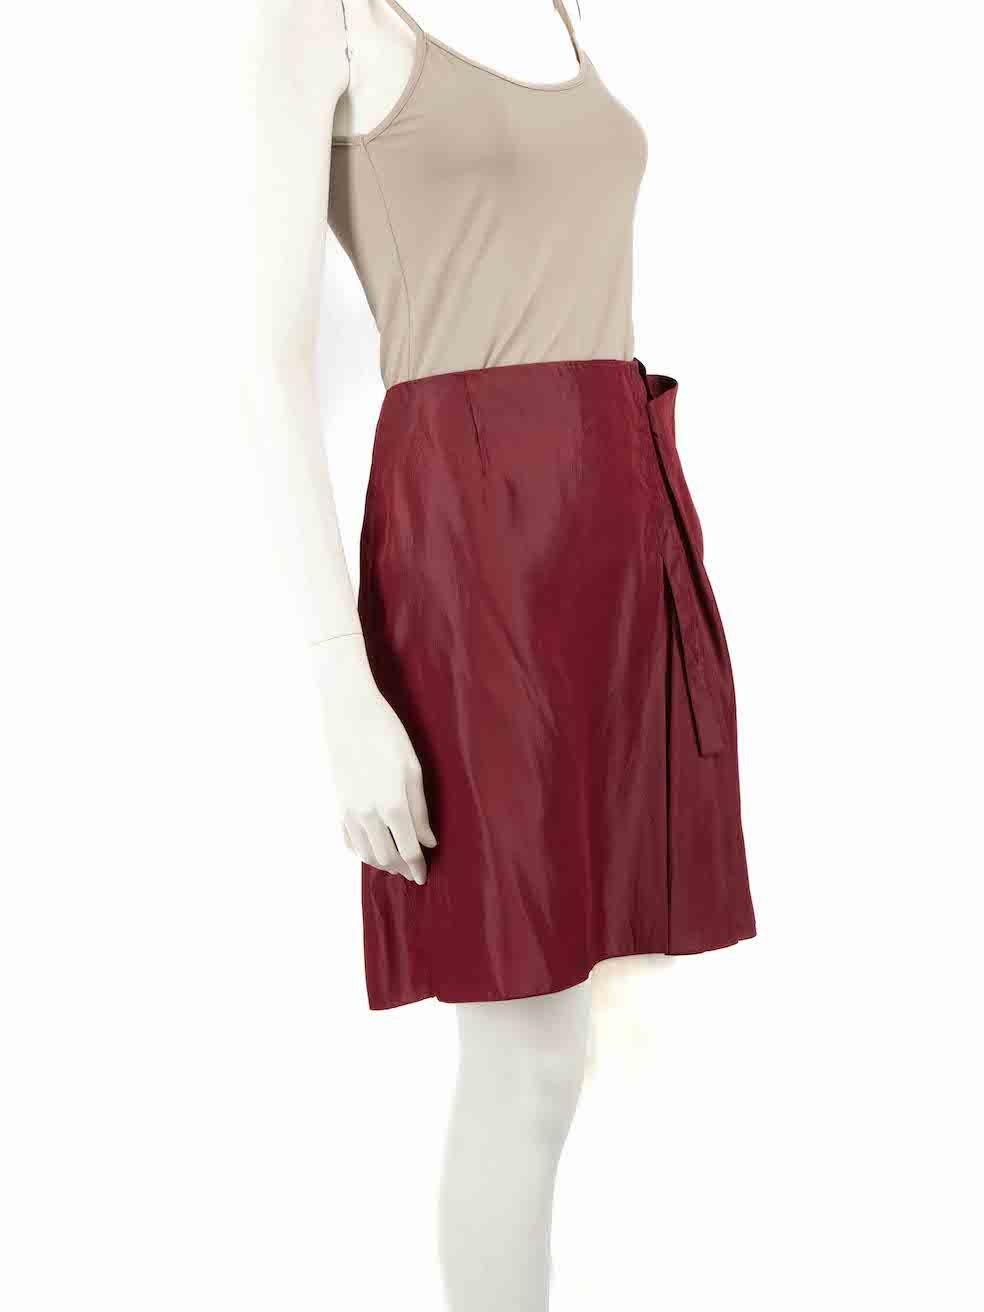 CONDITION is Very good. Minimal wear to skirt is evident. Tiny plucks to the weave and a small mark near the back hem on this used Marni designer resale item.
 
 
 
 Details
 
 
 Summer 2010
 
 Burgundy
 
 Synthetic
 
 Slip skirt
 
 Mini
 
 Side